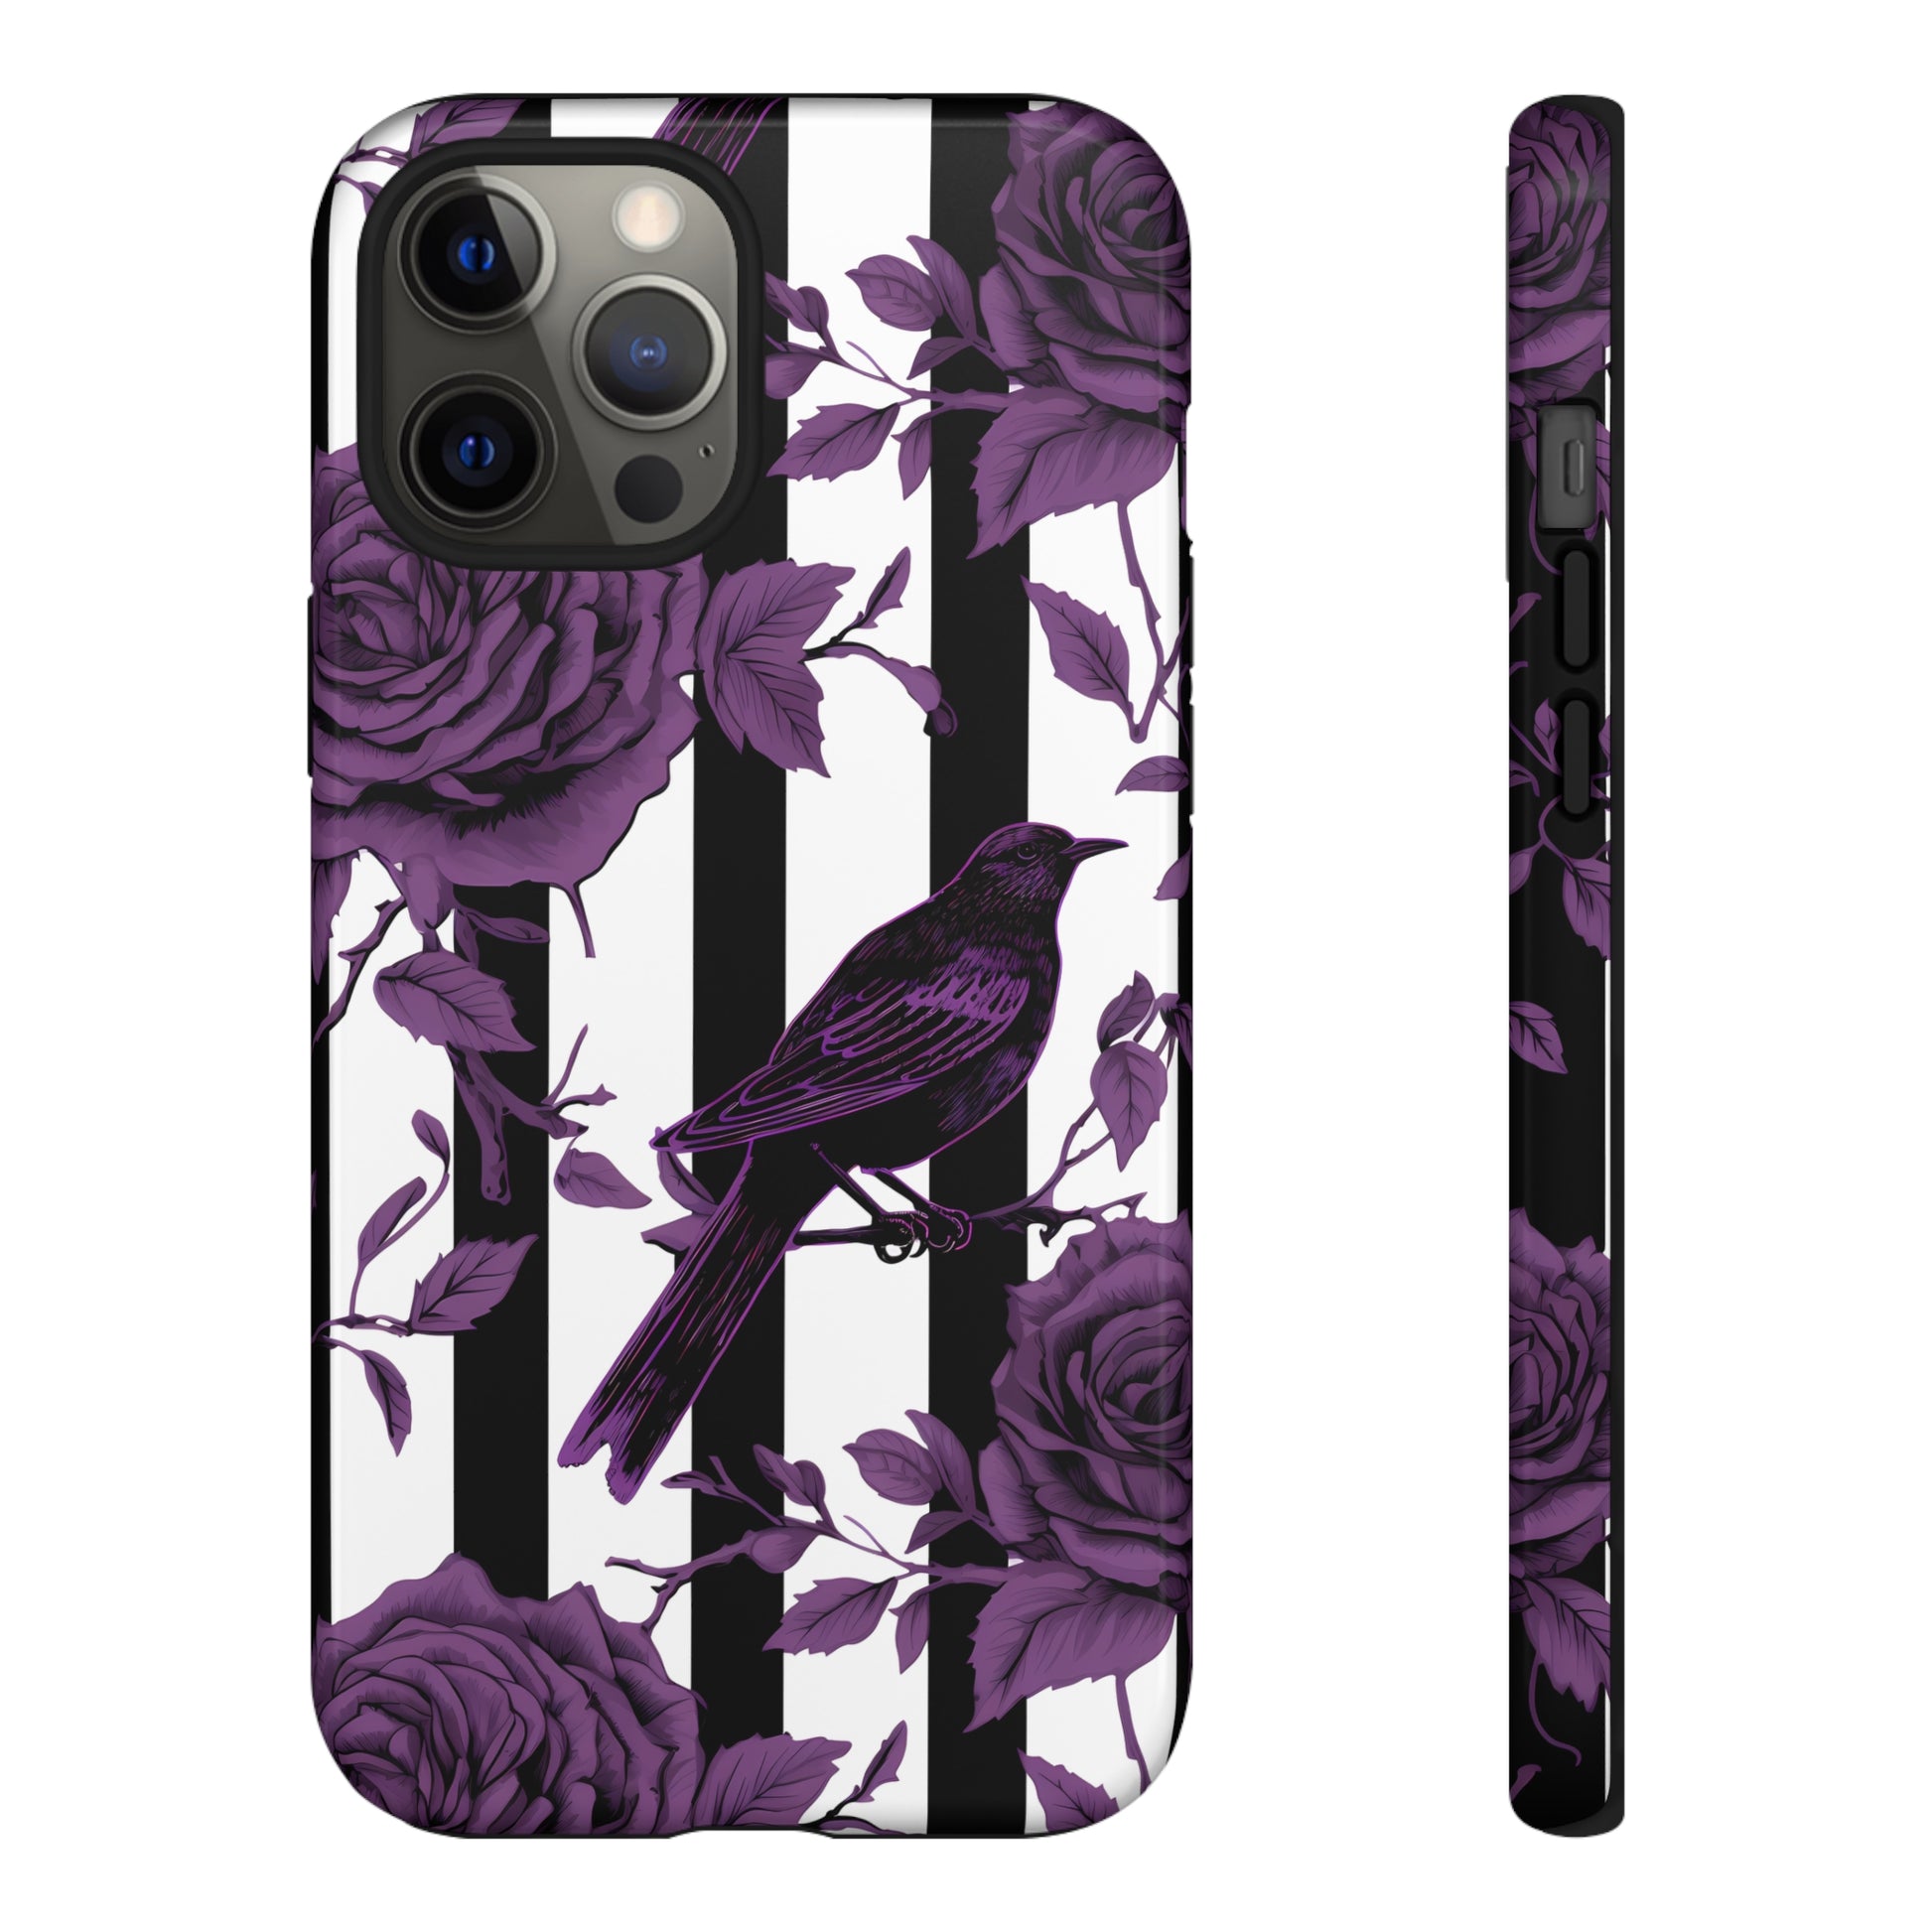 Striped Crows and Roses Tough Cases for iPhone Samsung Google PhonesPhone CaseVTZdesignsiPhone 12 Pro MaxGlossyAccessoriescrowsGlossy